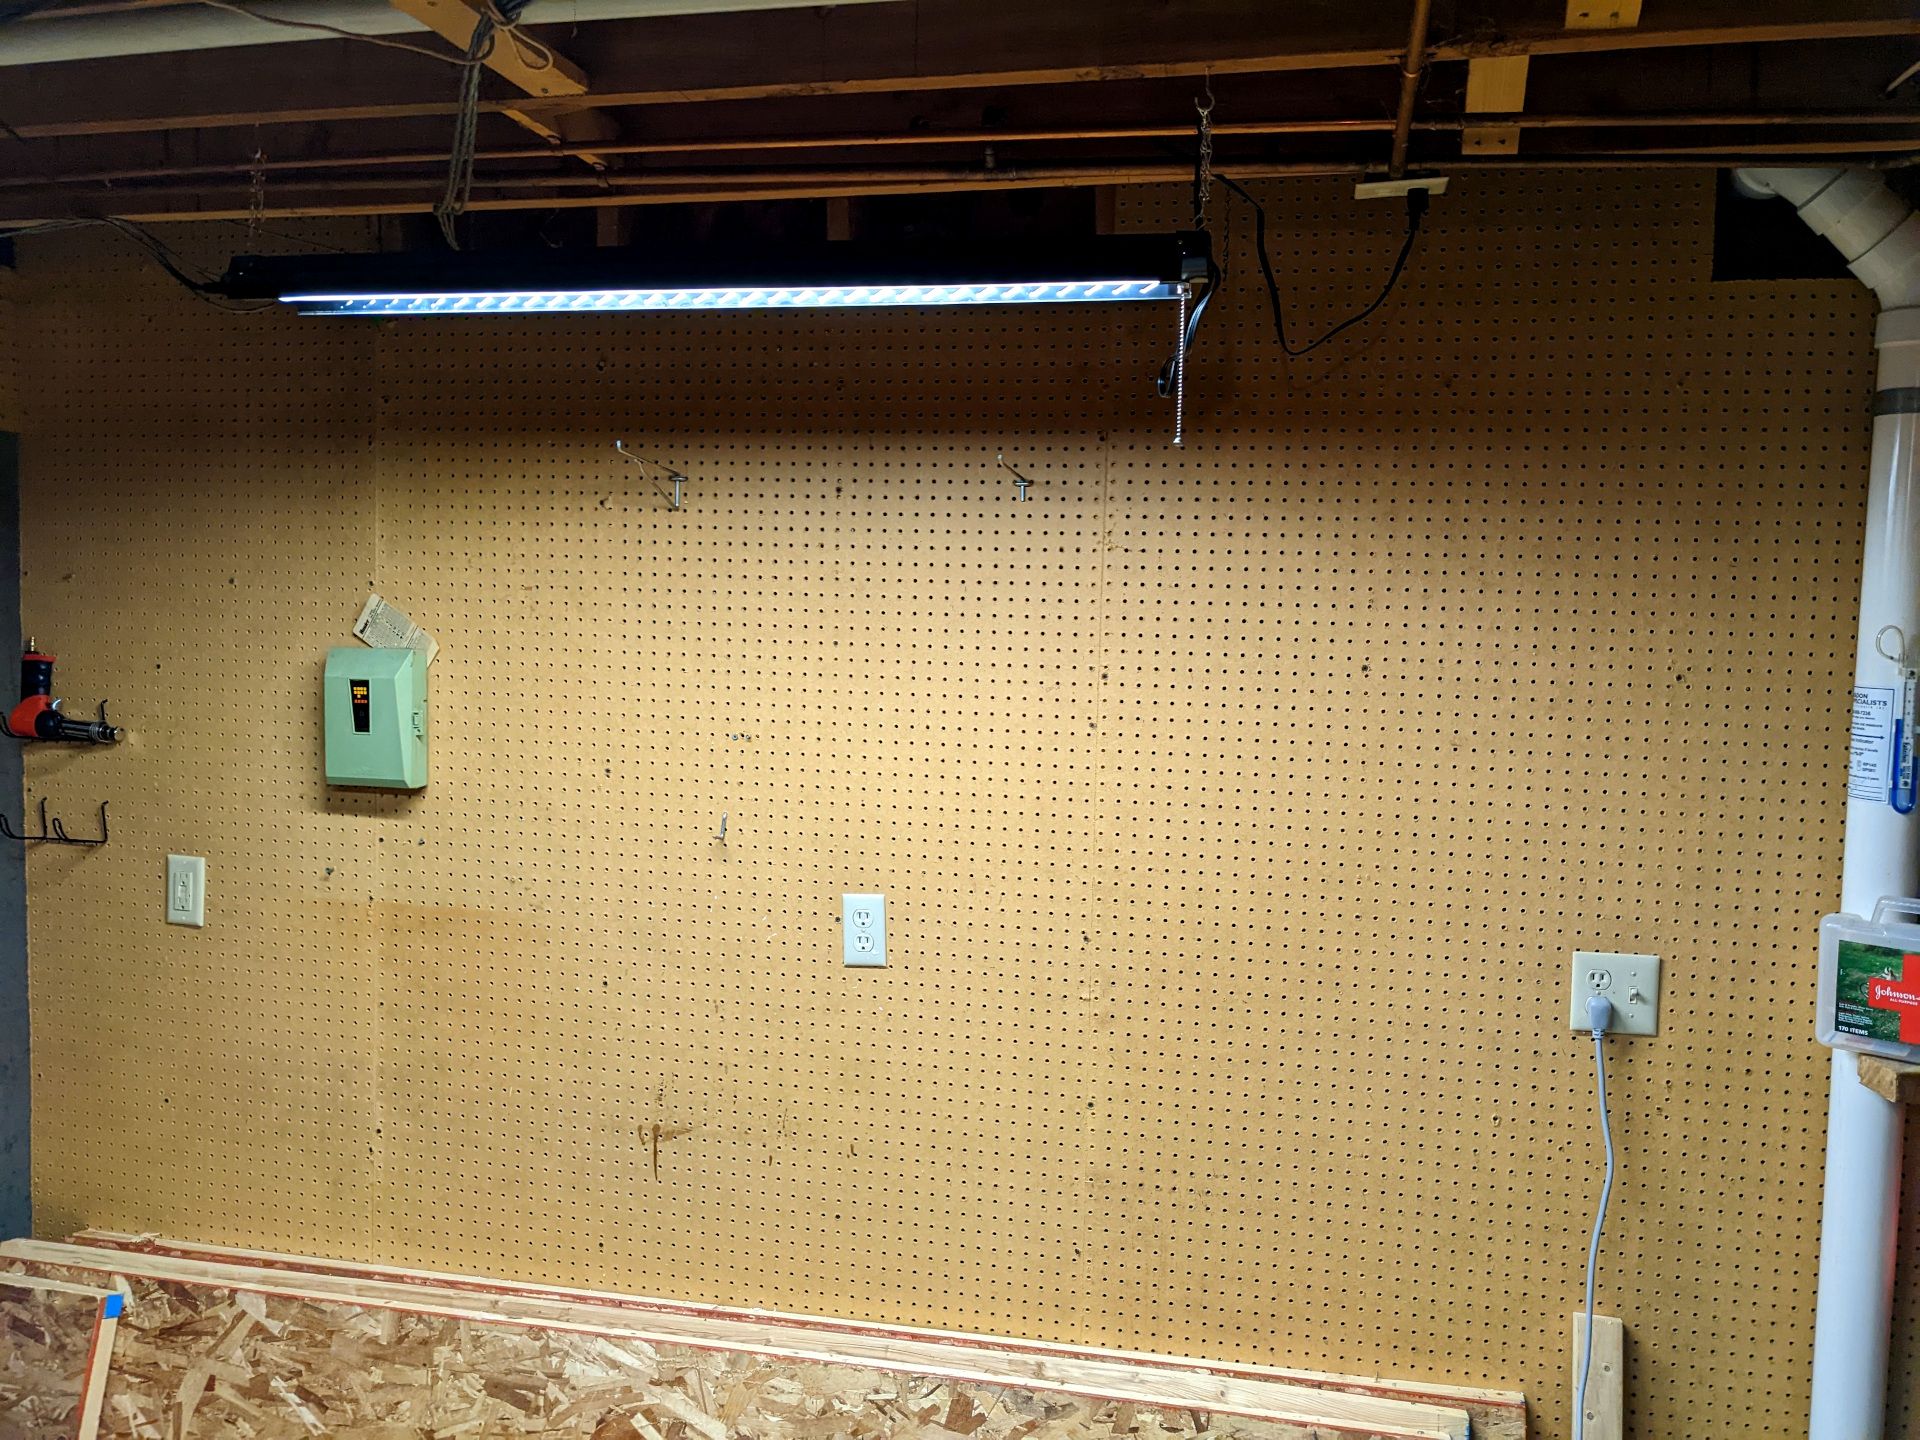 An empty pegboard, save one rivet gun on the far left